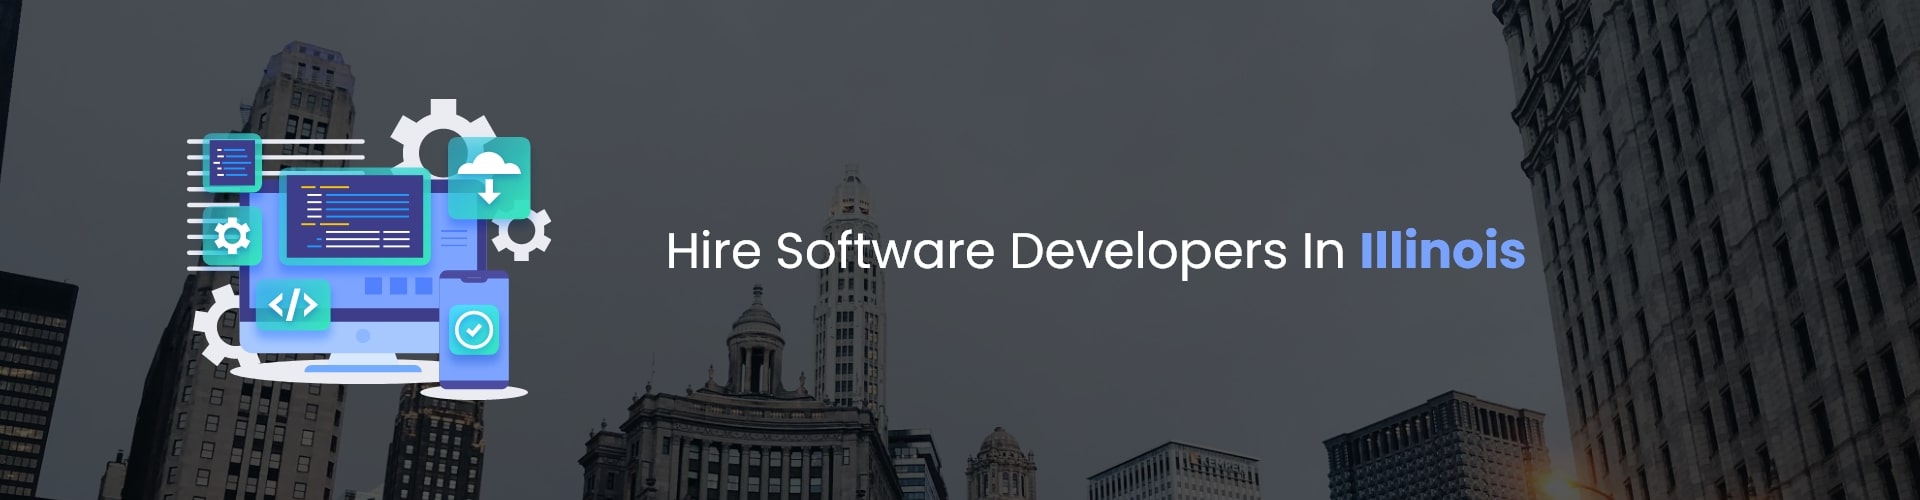 hire software developers in illinois